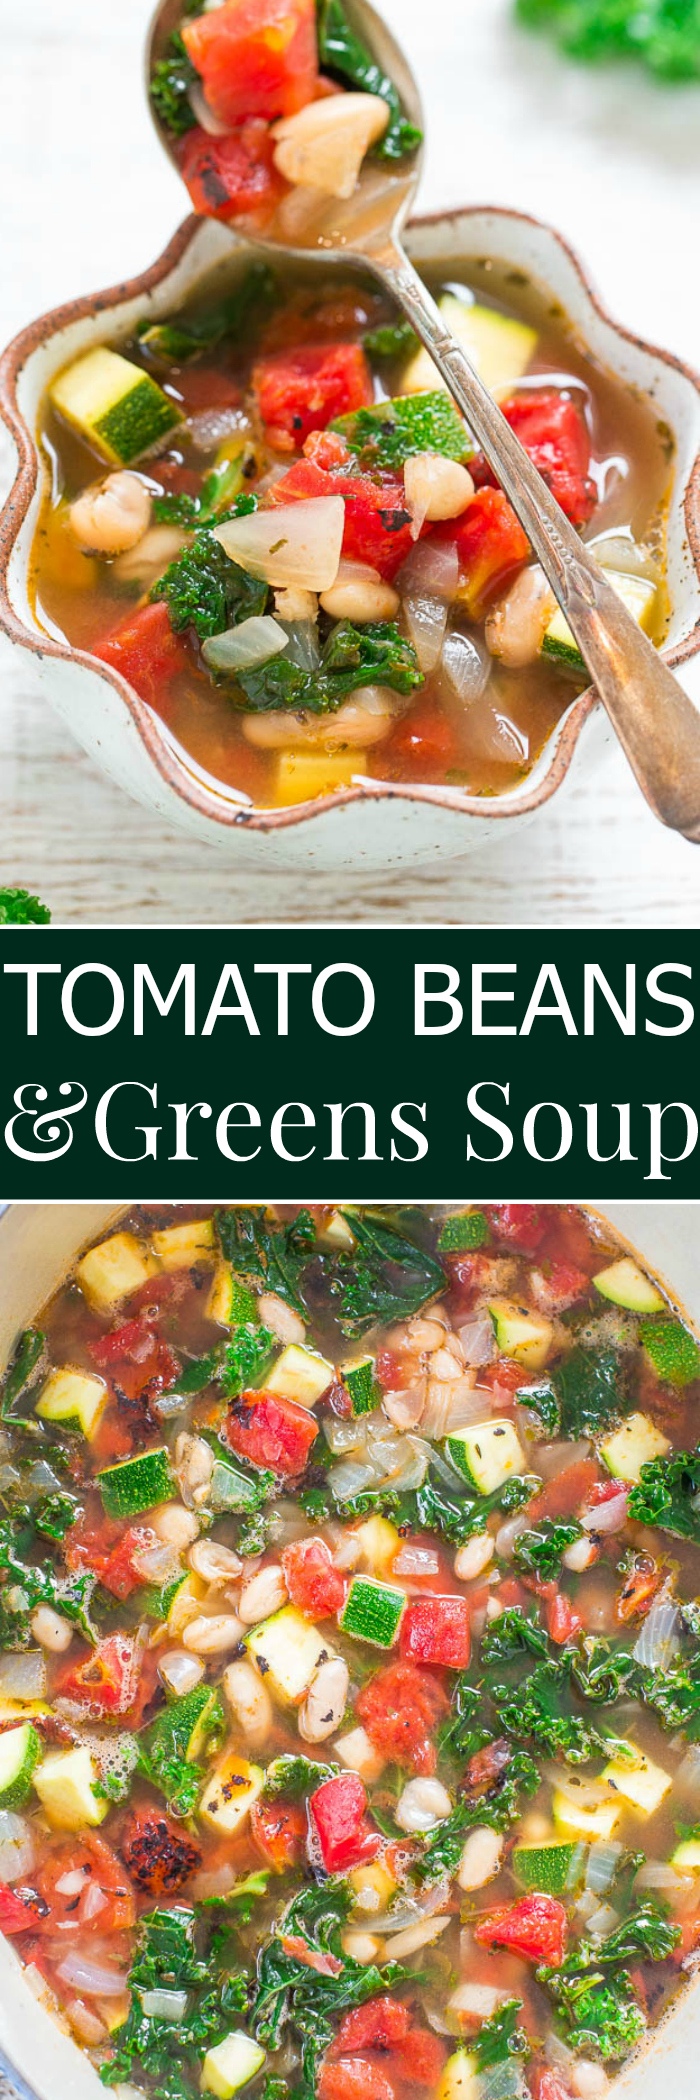 Tomato, Beans, and Greens Soup - Trying to eat healthier? You're going to love this EASY, hearty, HEALTHY soup that's ready in 30 minutes and full of flavor and texture from the veggies!! 